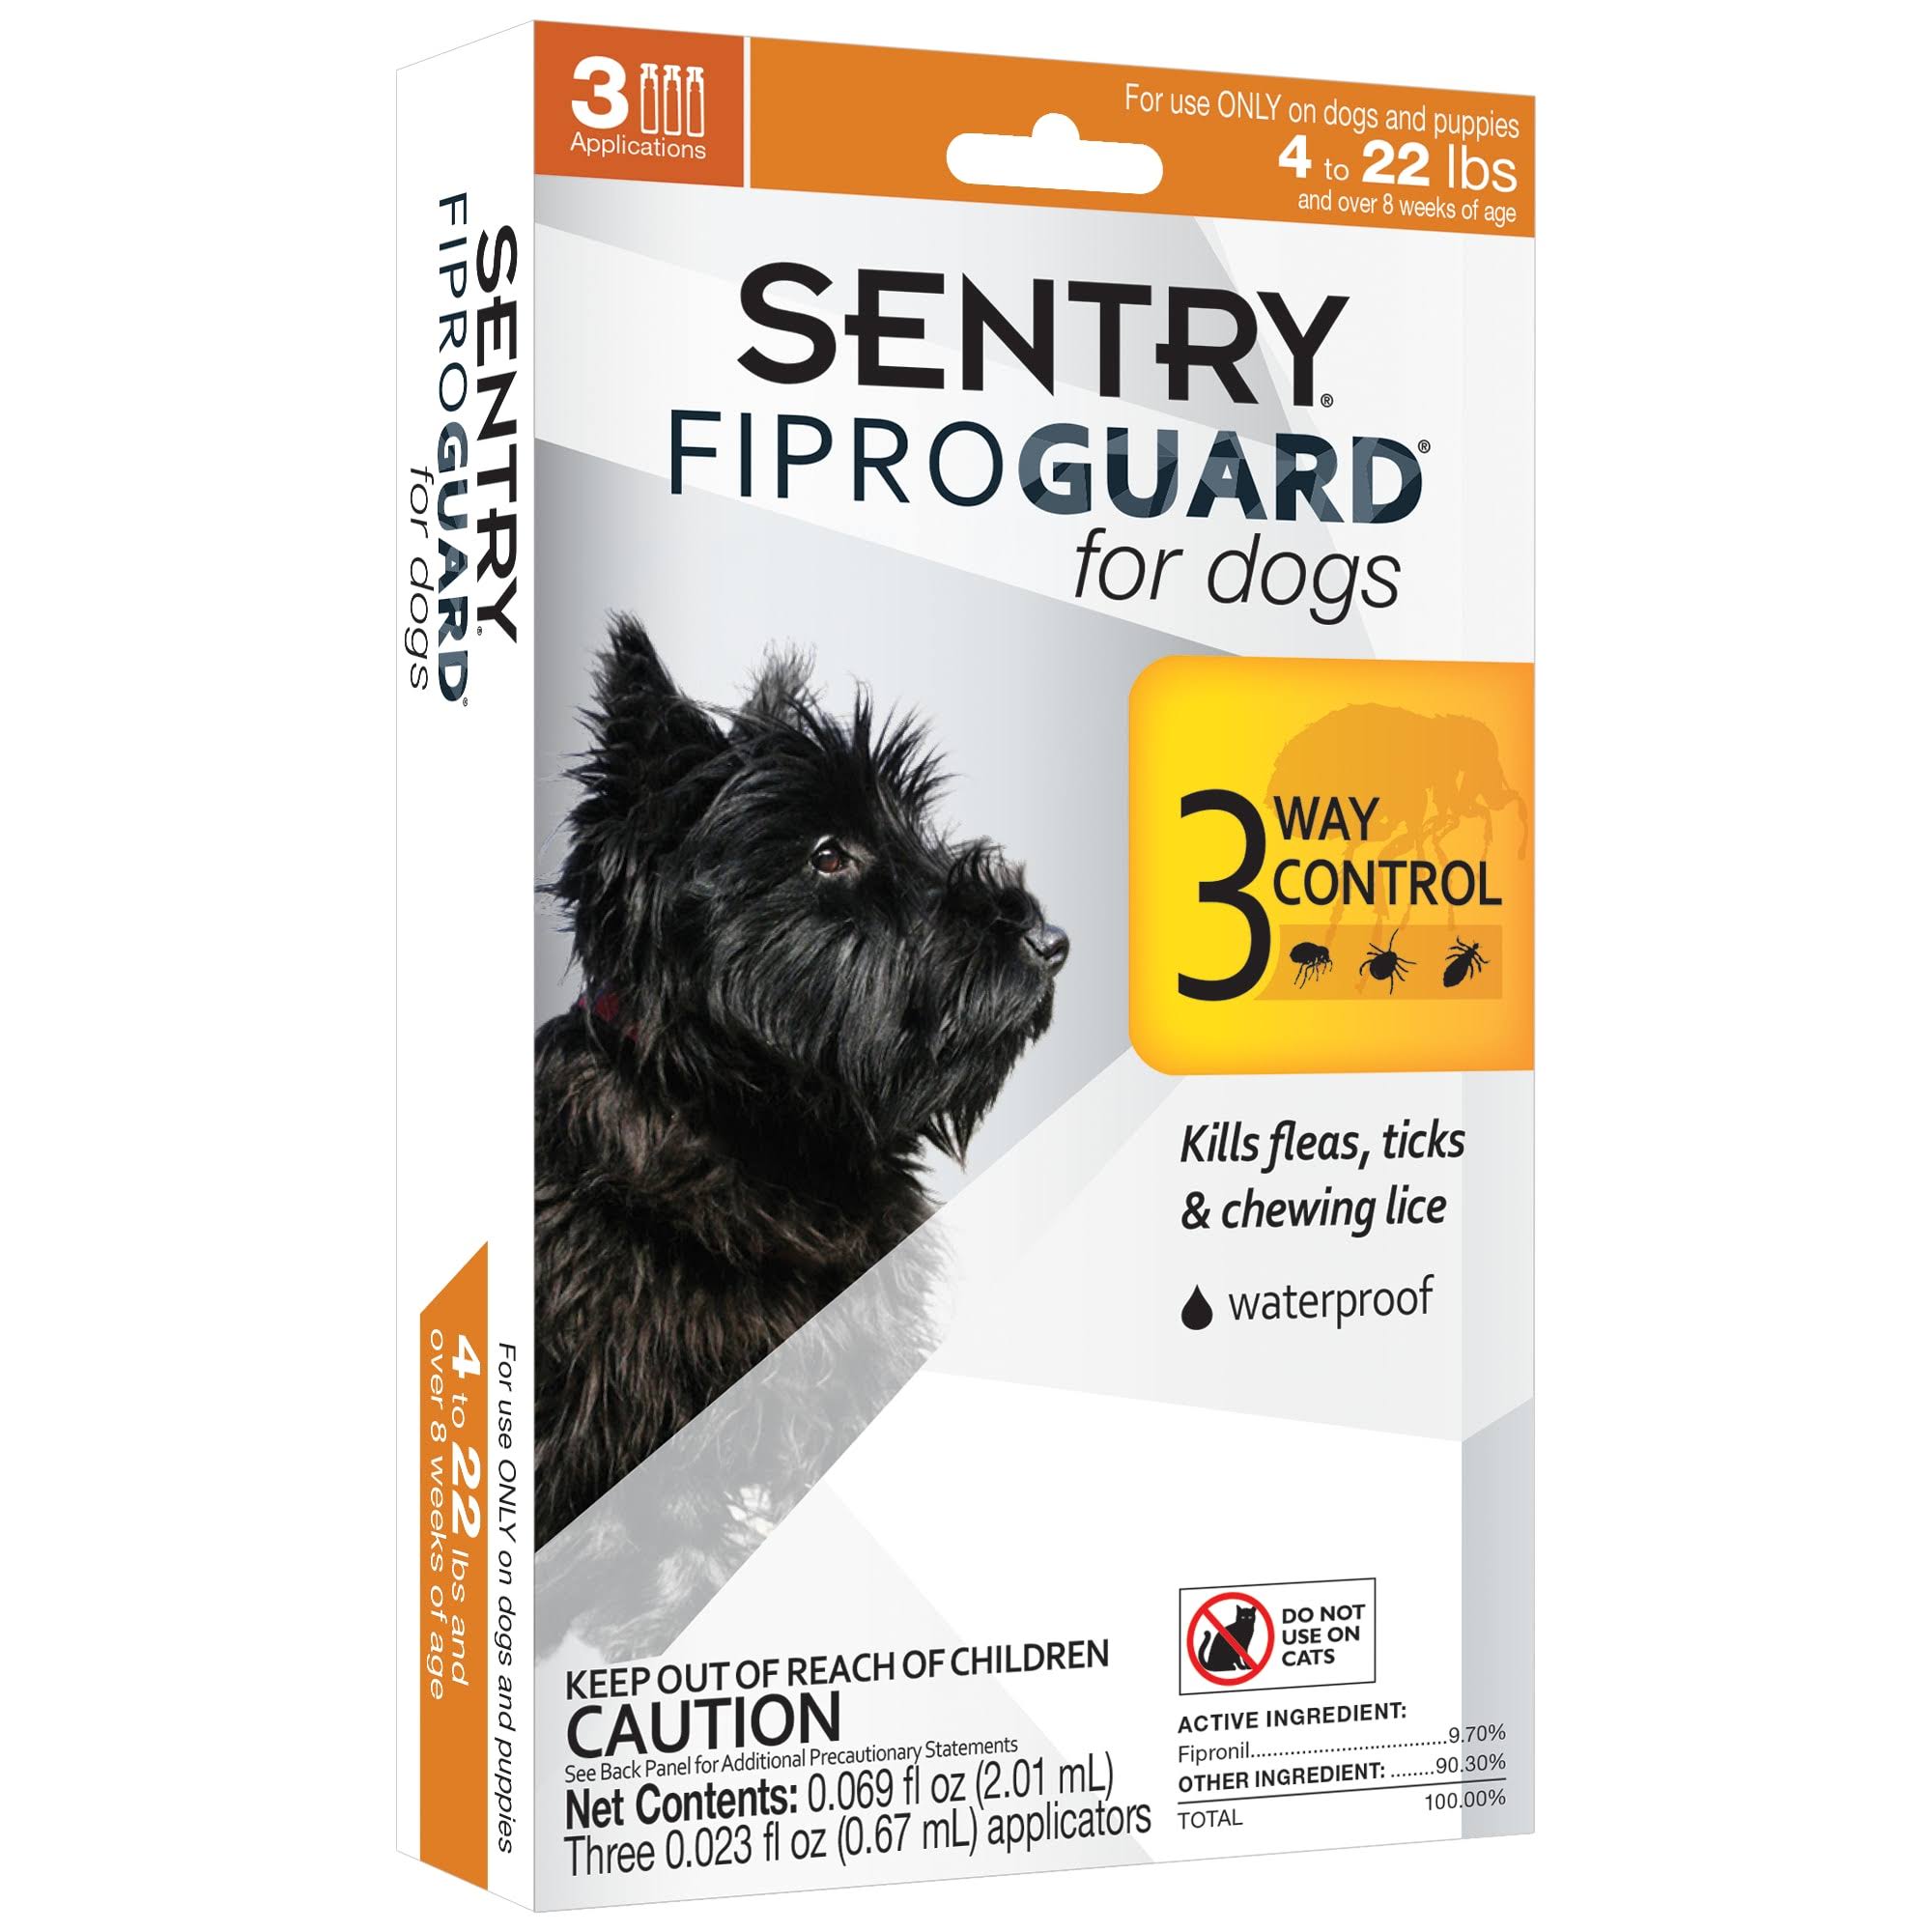 Sentry FiproGuard Topical Flea and Tick Dog Treatment - 2.01ml